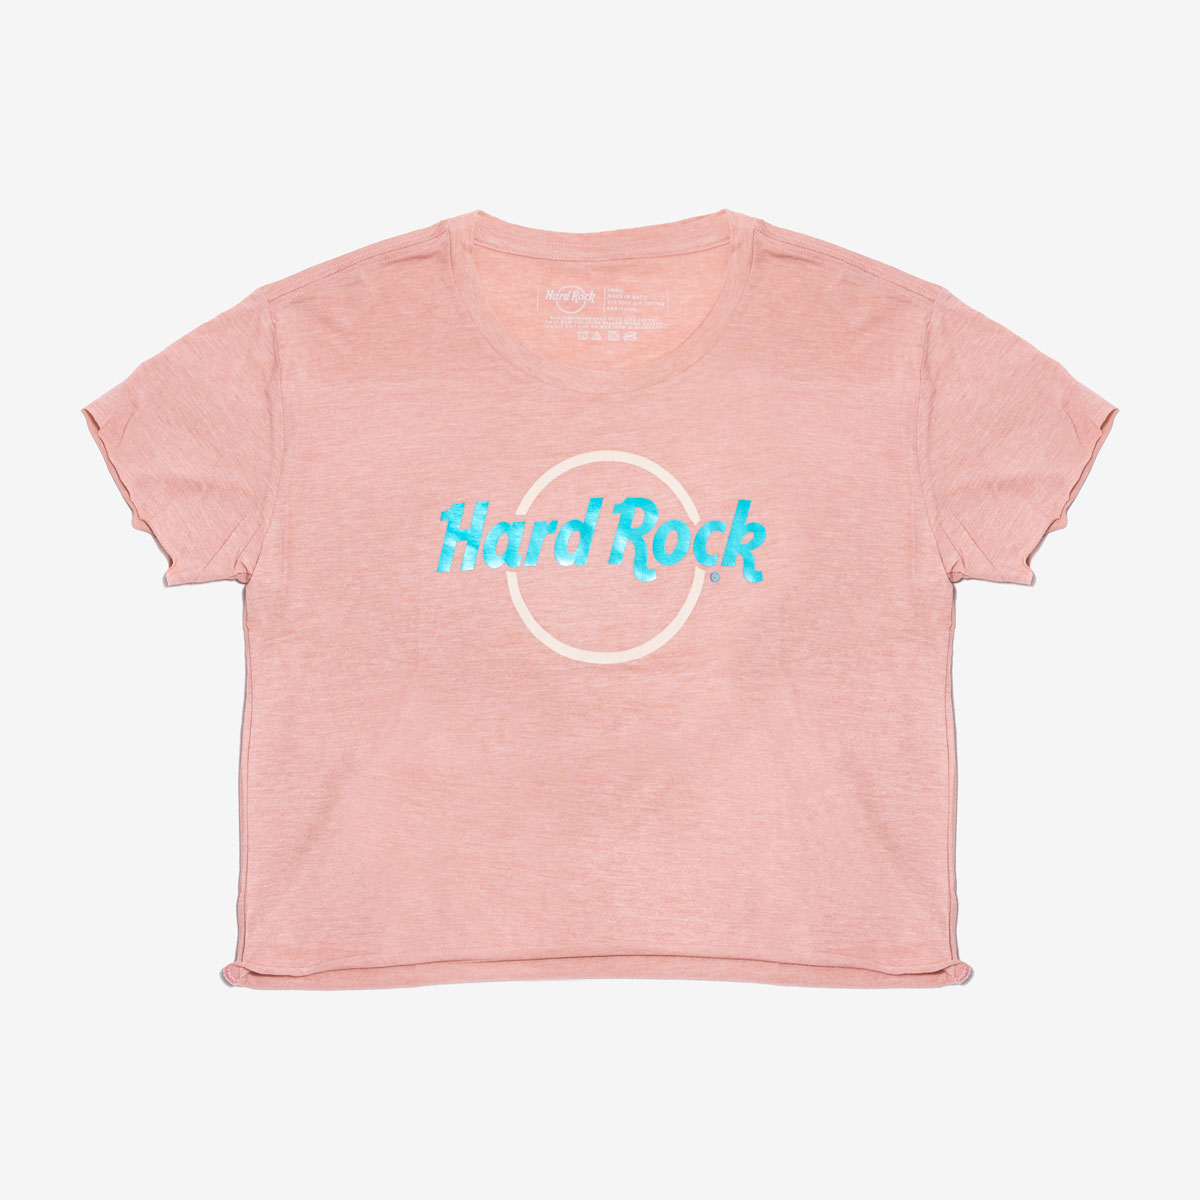 Hard Rock Pop of Color Cropped Tee in Pink and Teal image number 3